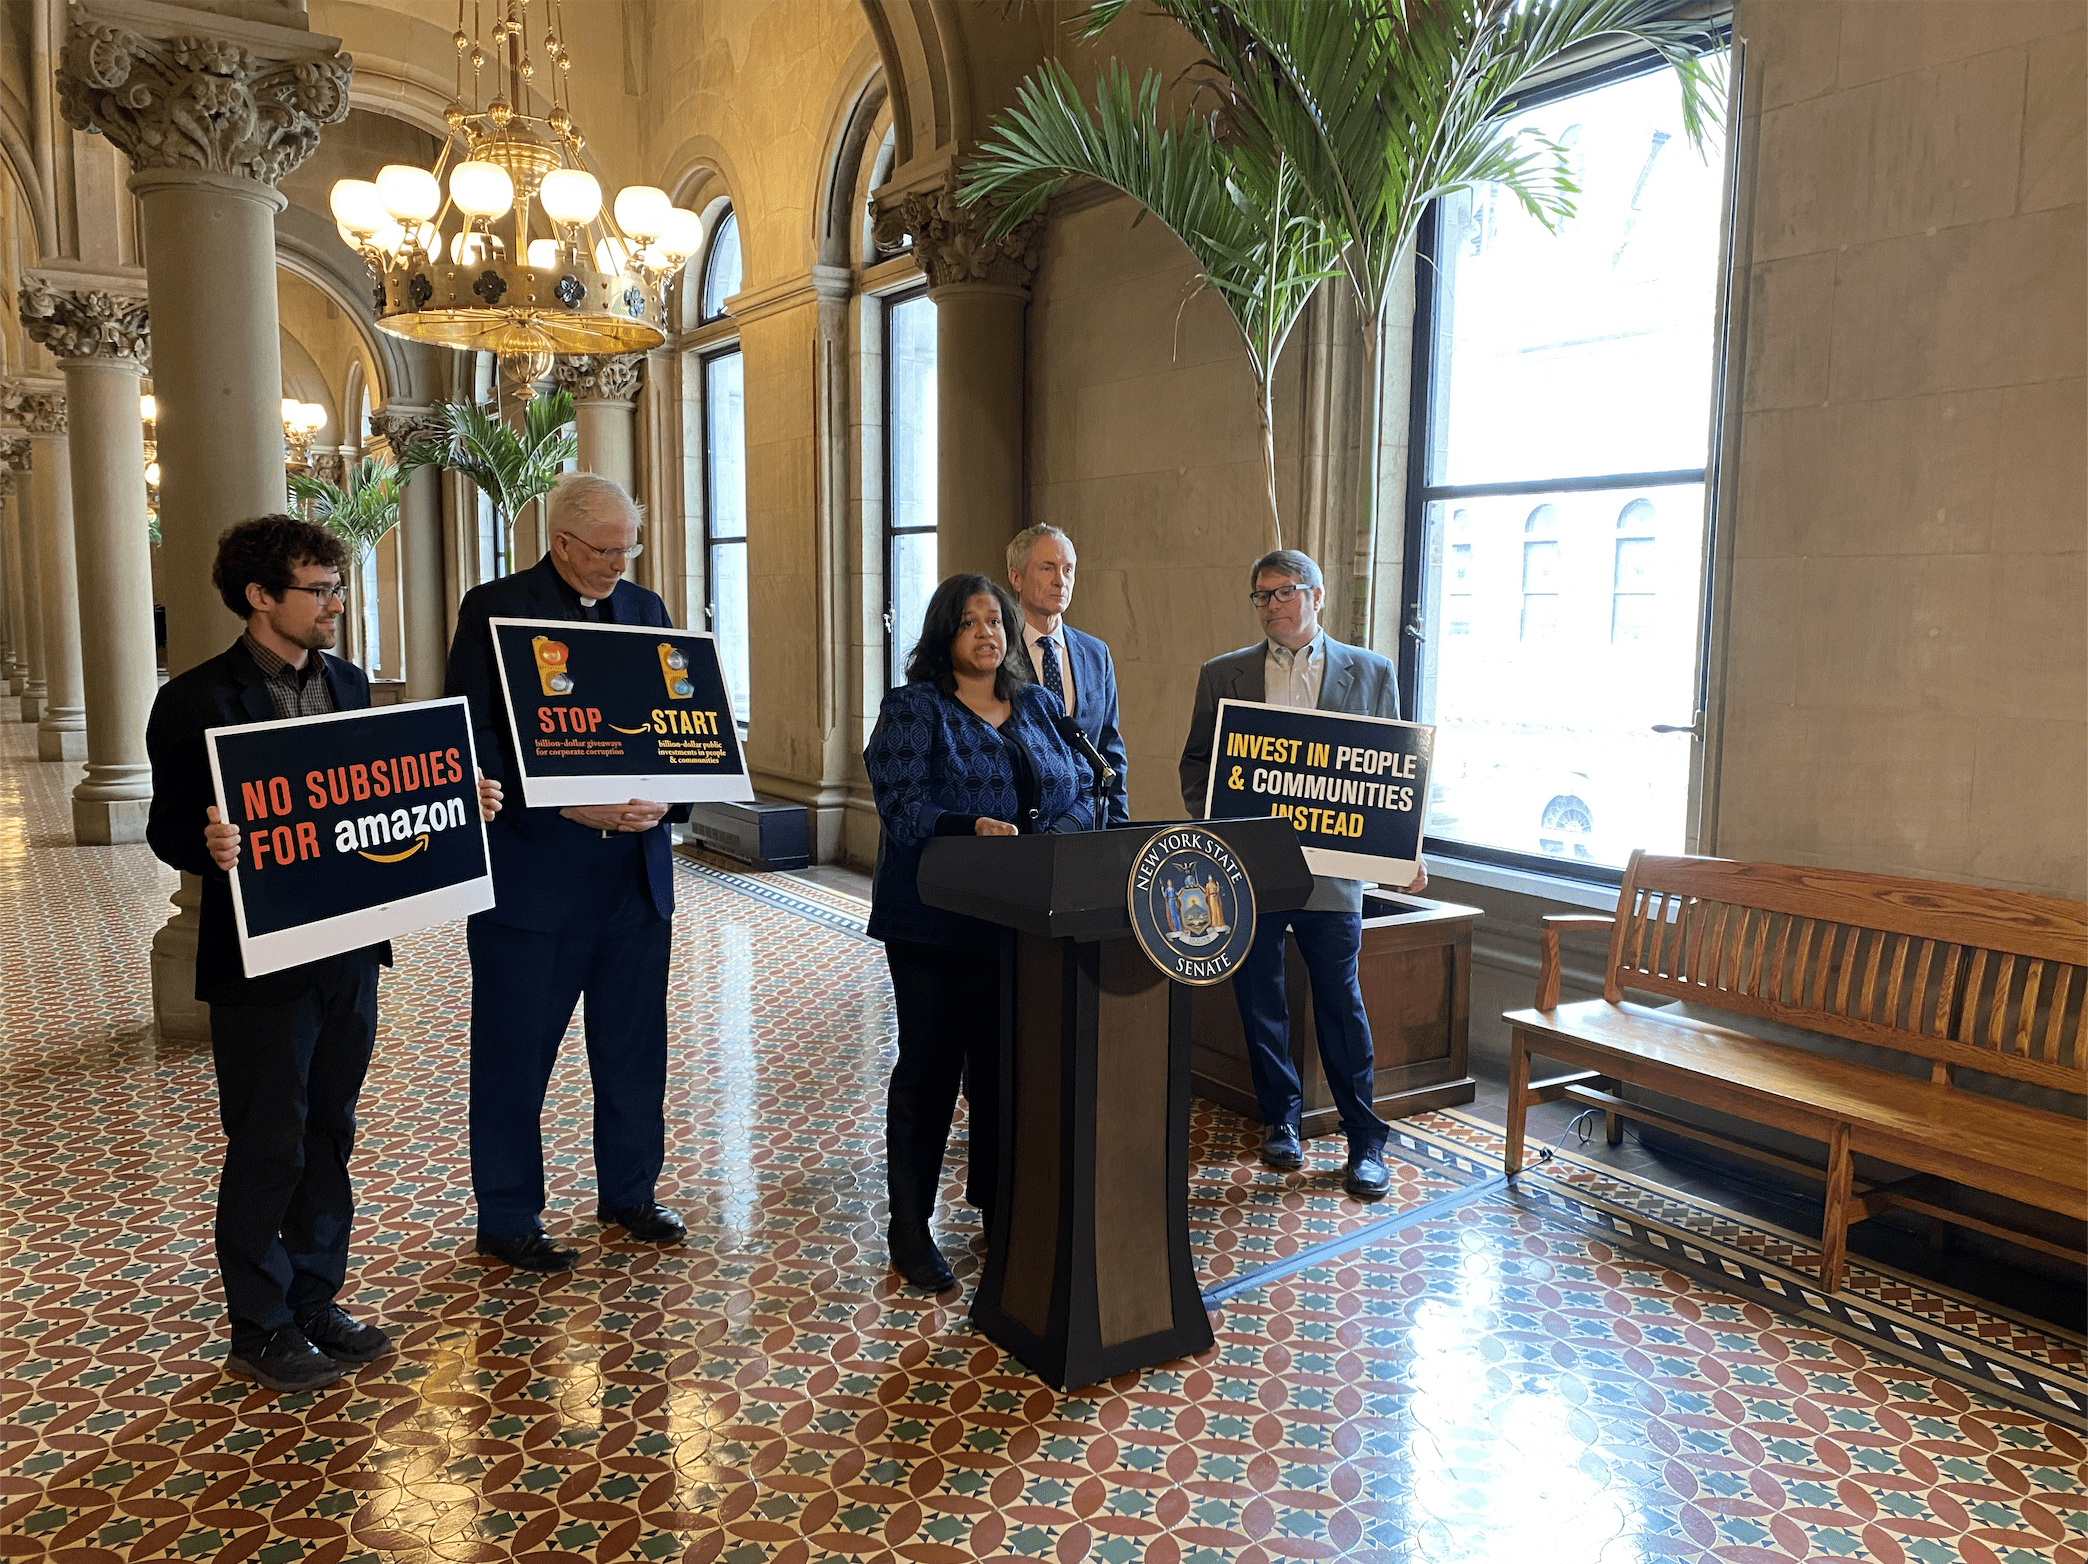 Elected leaders and community organizations support legislation to stop giving subsidies to e-commerce warehouses and logistics facilities. Press conference was held in Albany, N.Y.